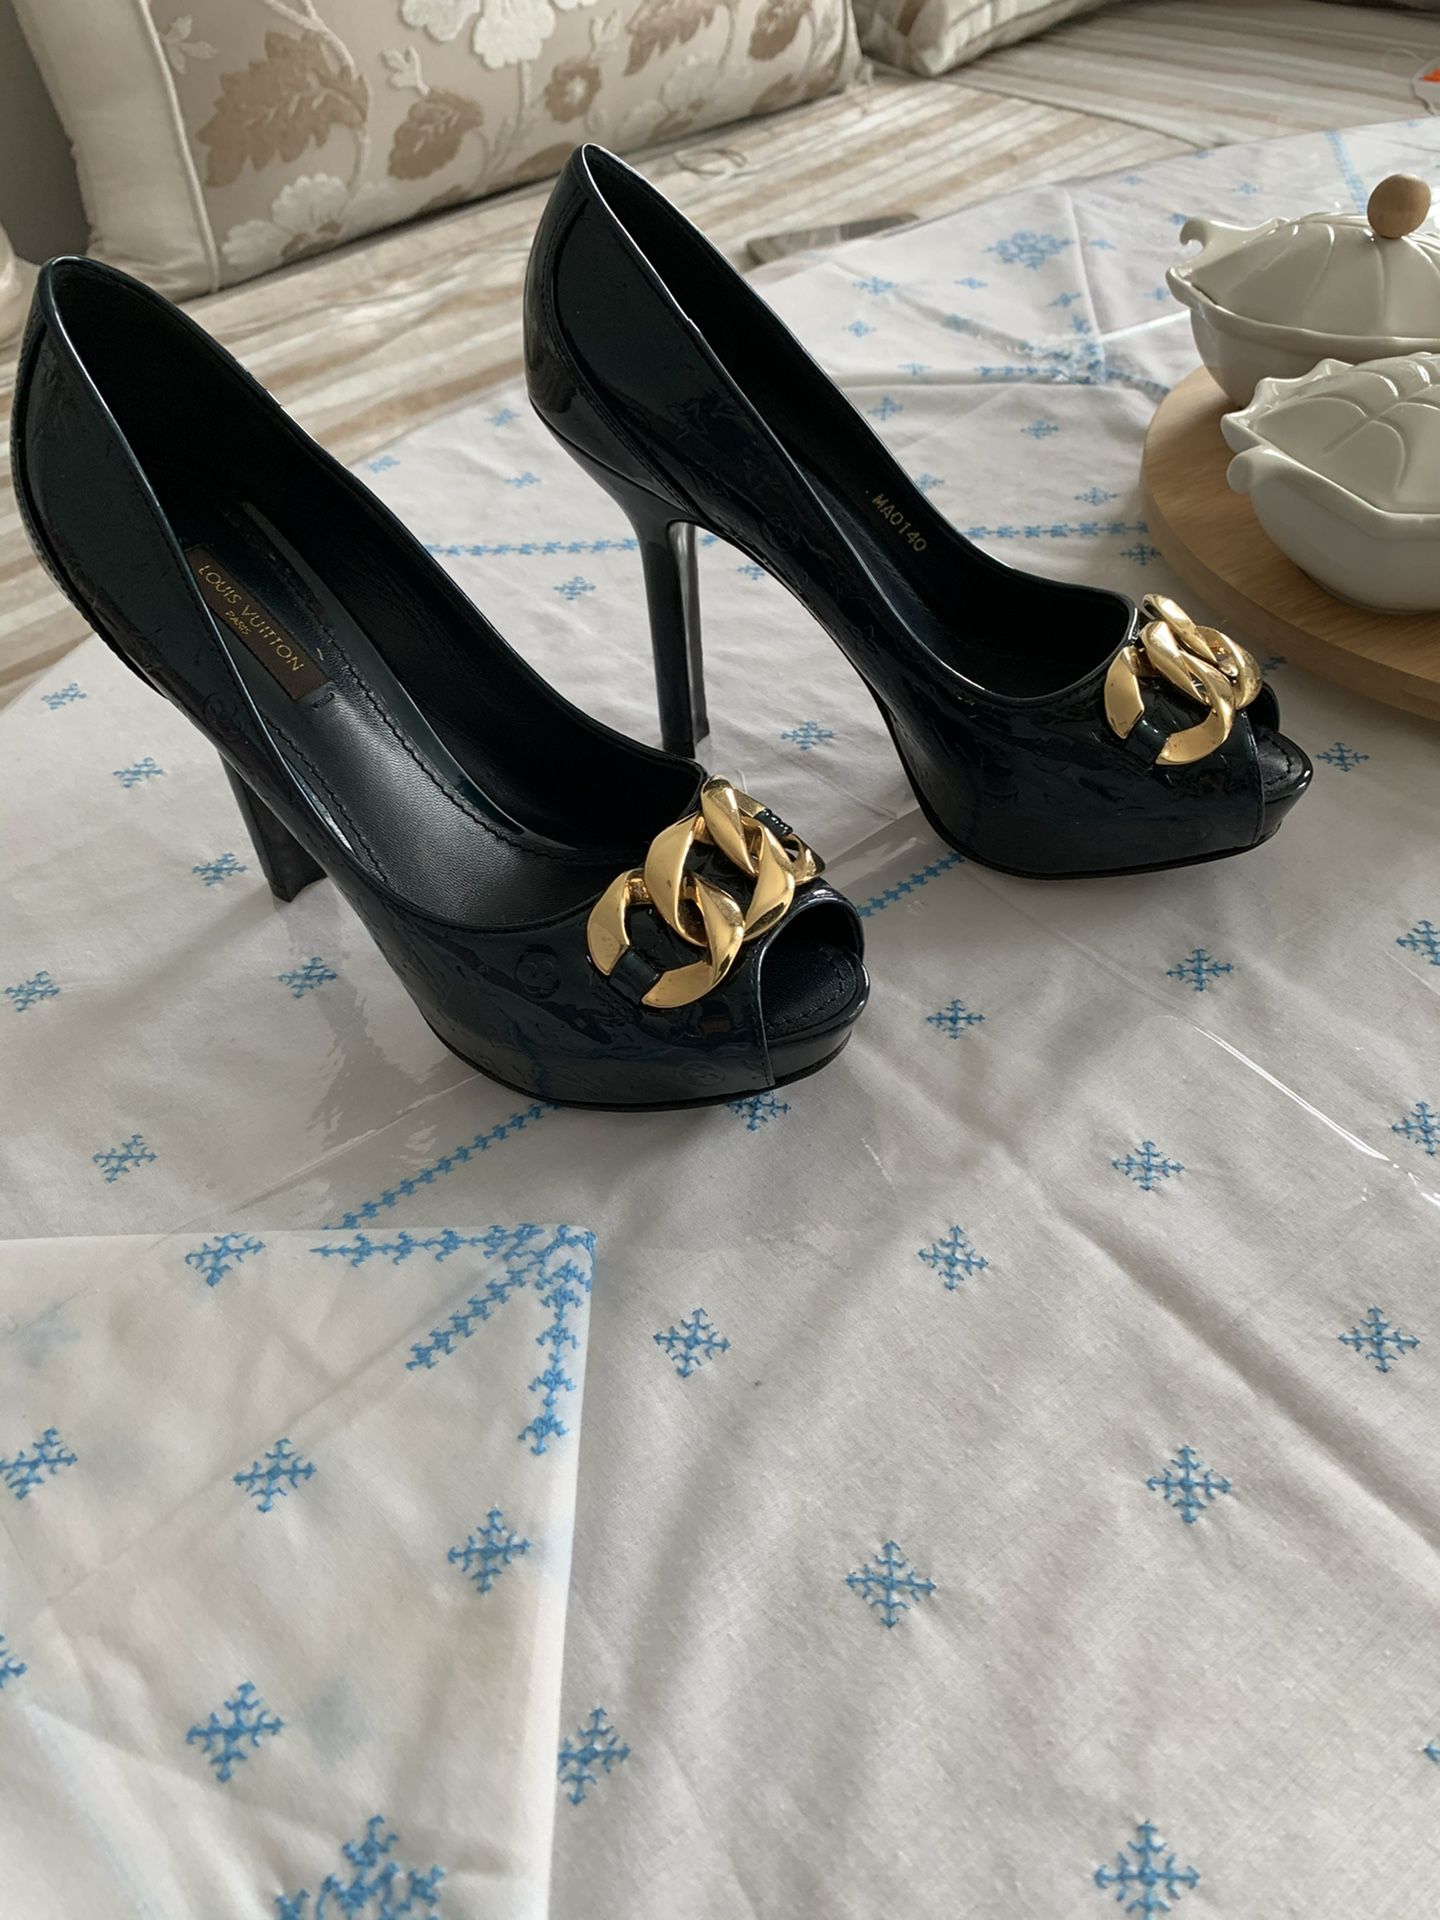 Lv boots for Sale in Brooklyn, NY - OfferUp